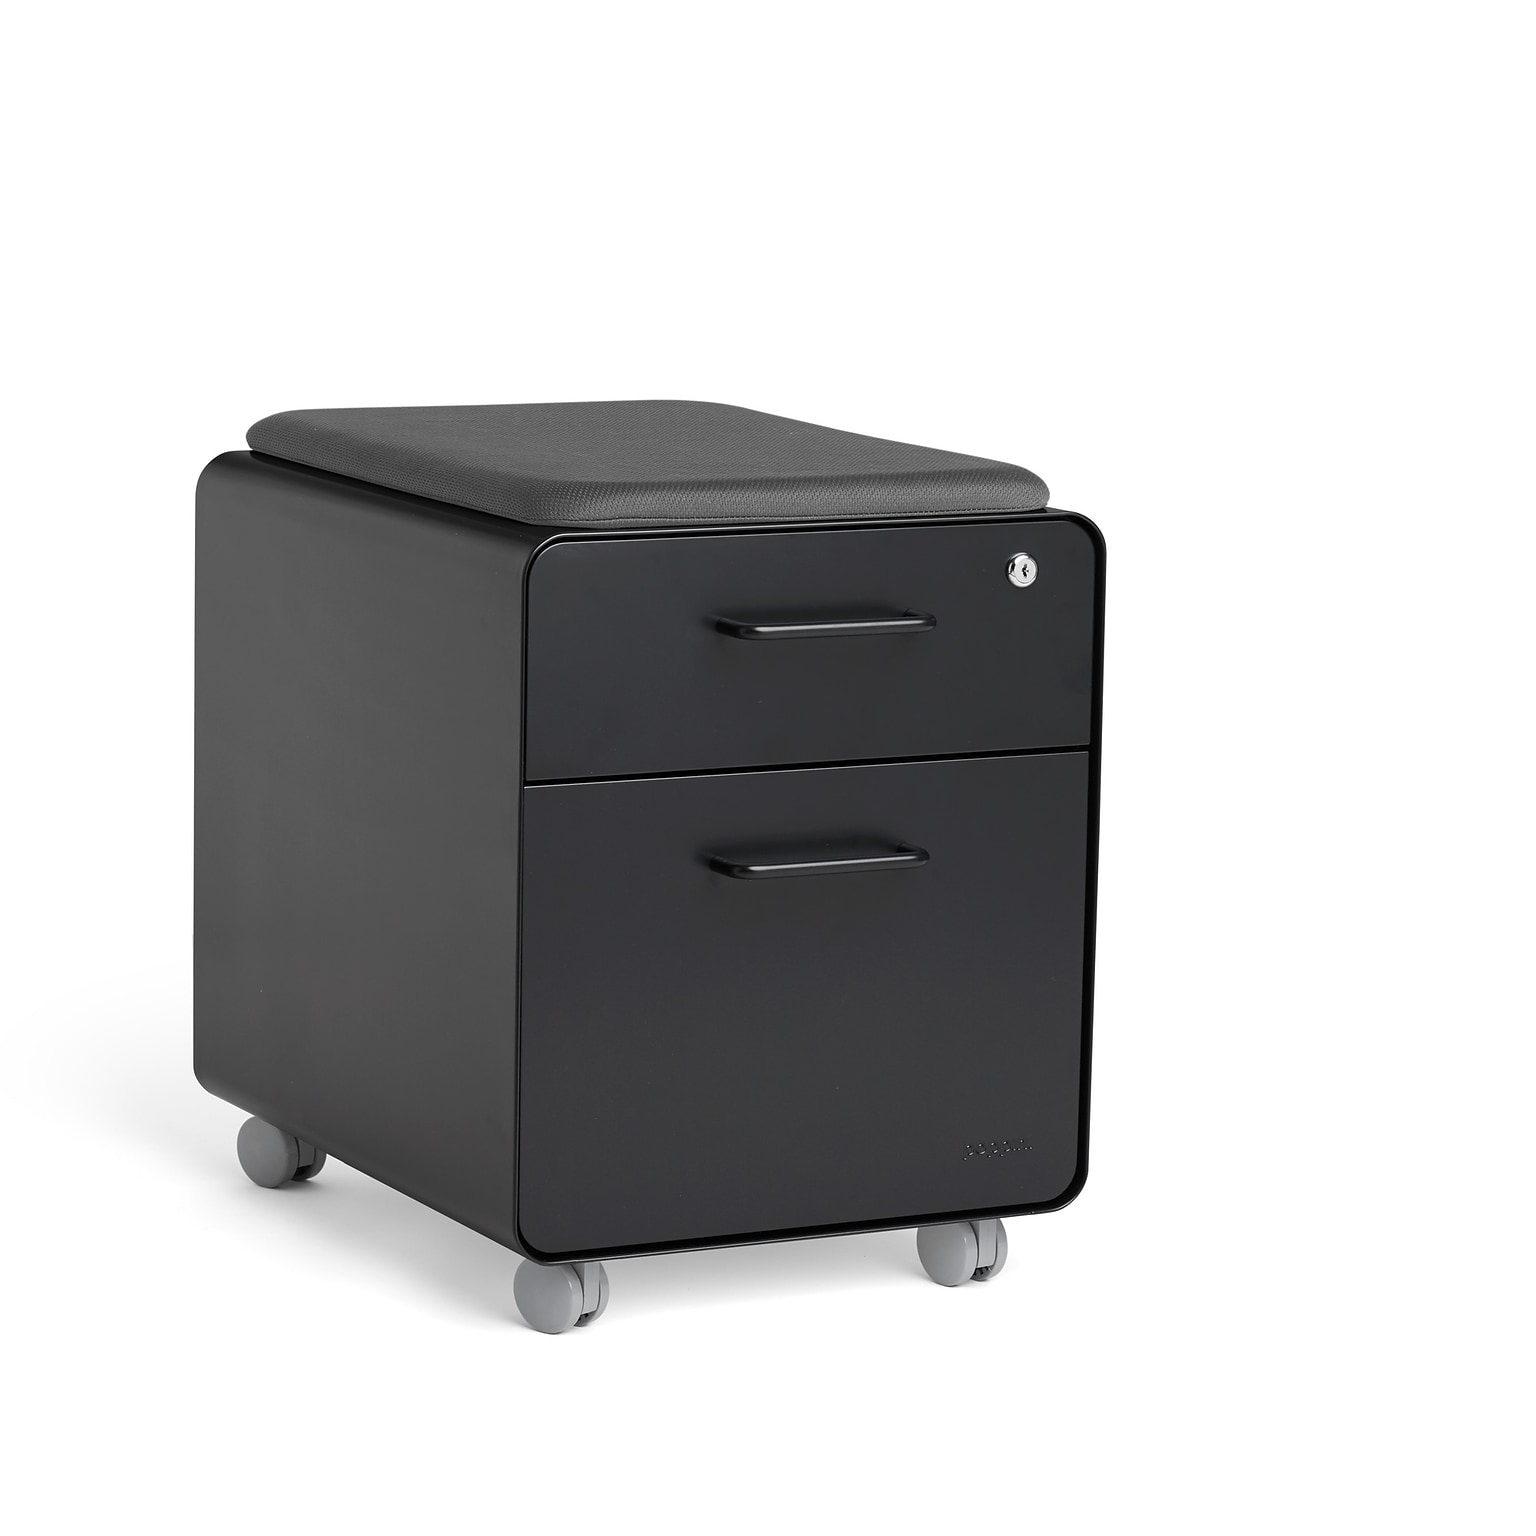 Poppin Black Mini Stow 2-Drawer Vertical File Cabinet, Rolling, Black (104730)